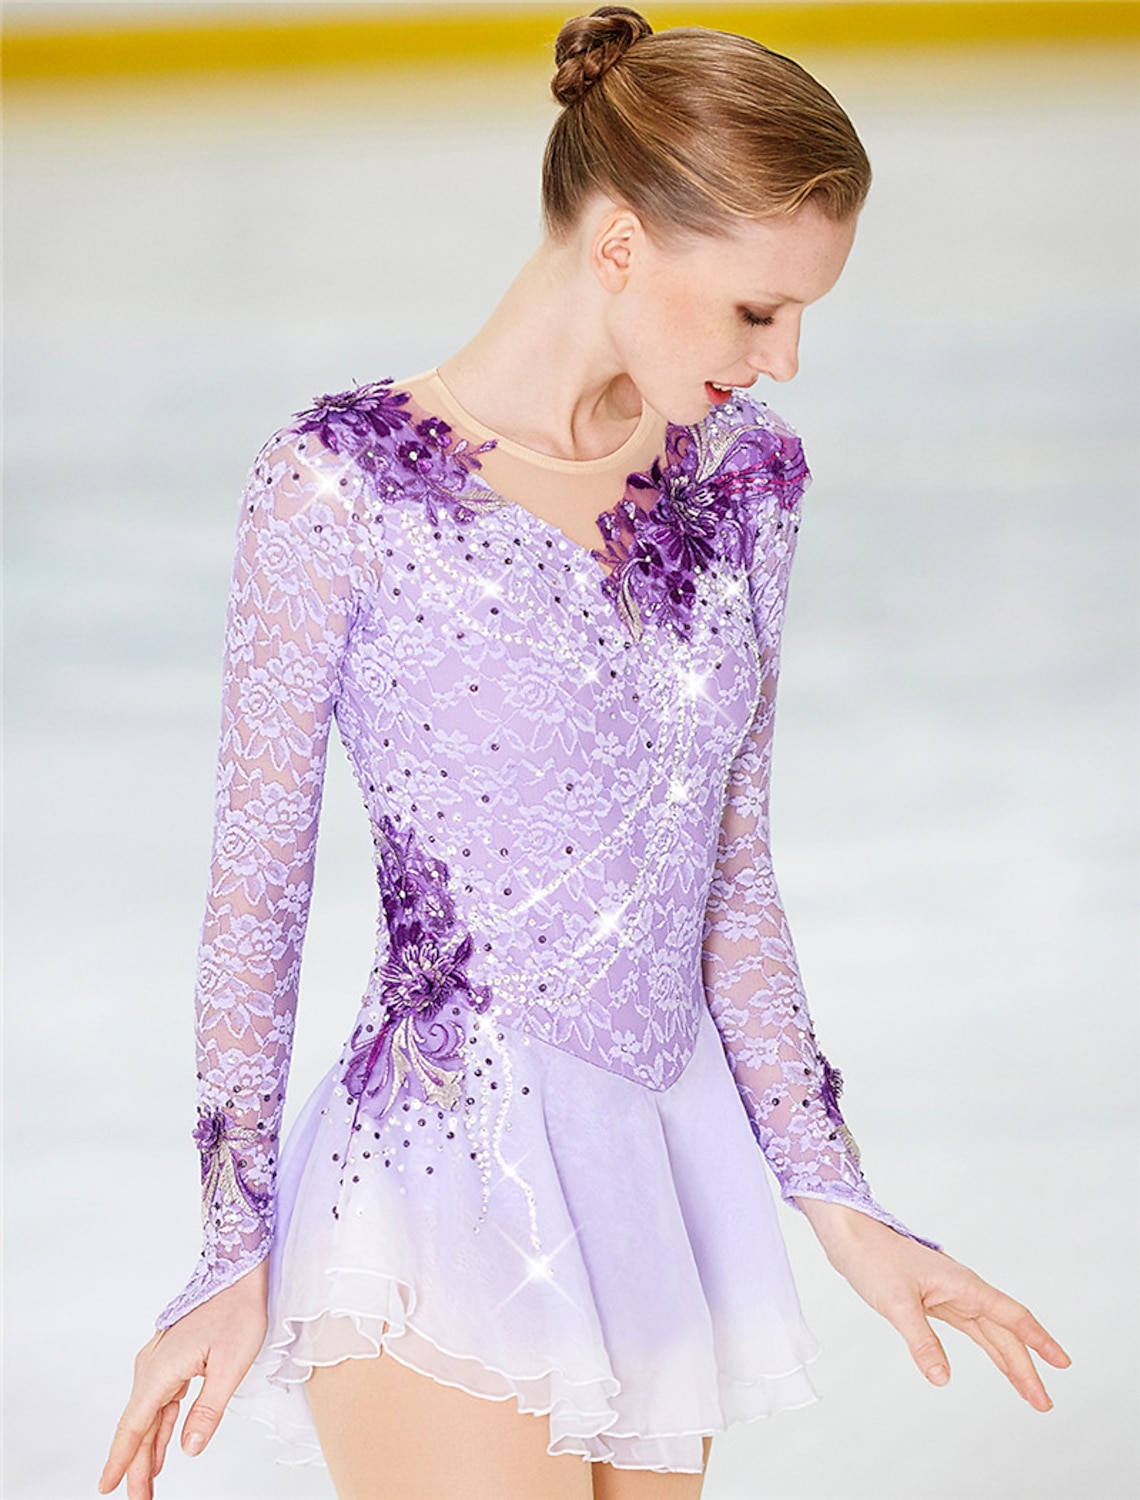 NEW Girls PURPLE VELVET Floral LILAC LACE Competition FIGURE ICE SKATING DRESS 